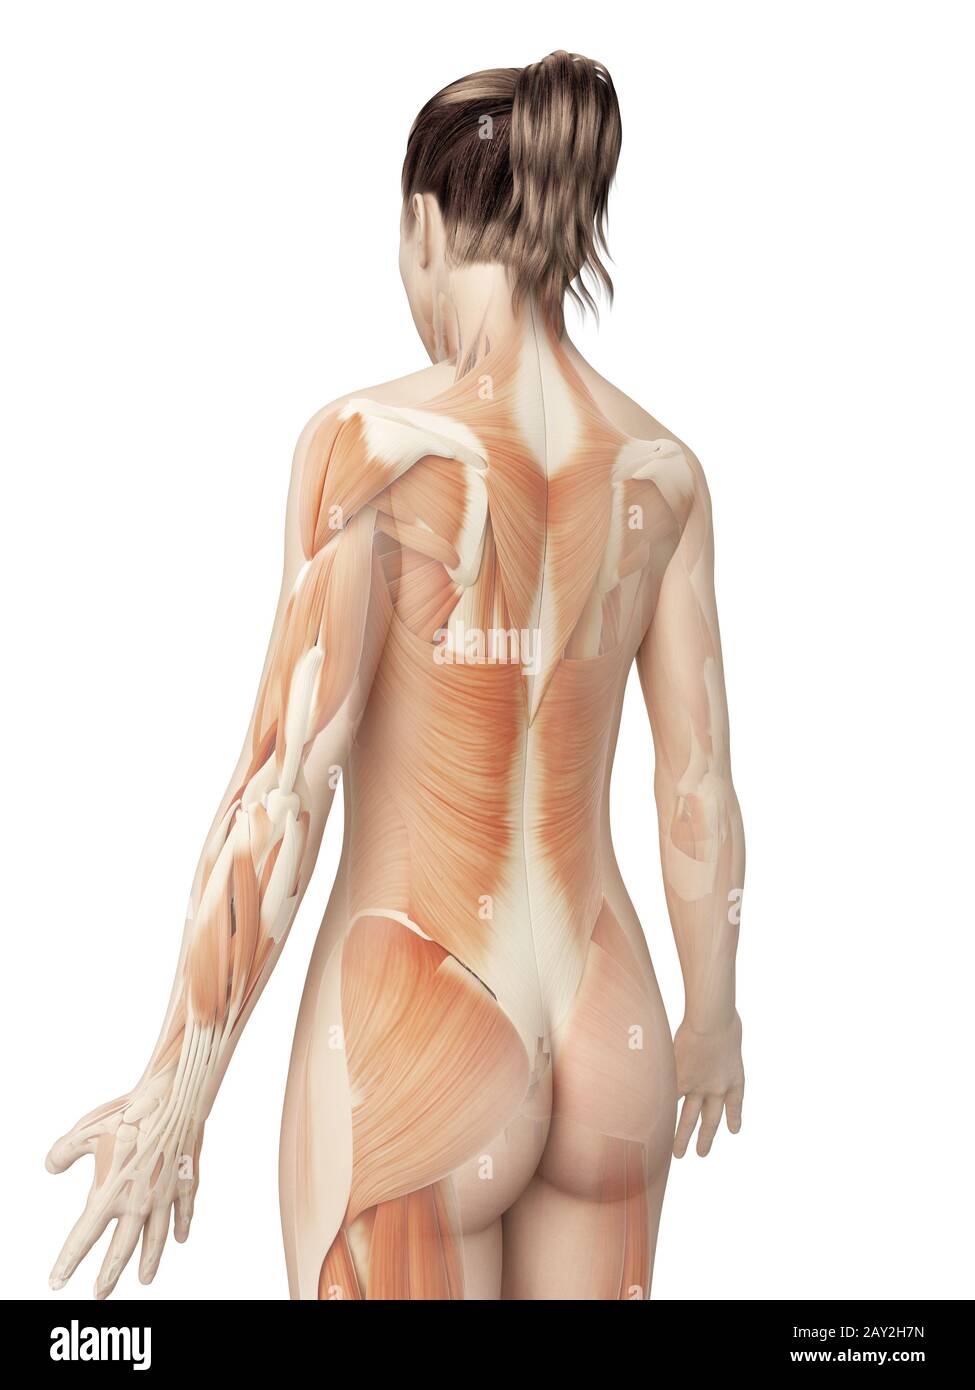 female muscular system from behind Stock Photo